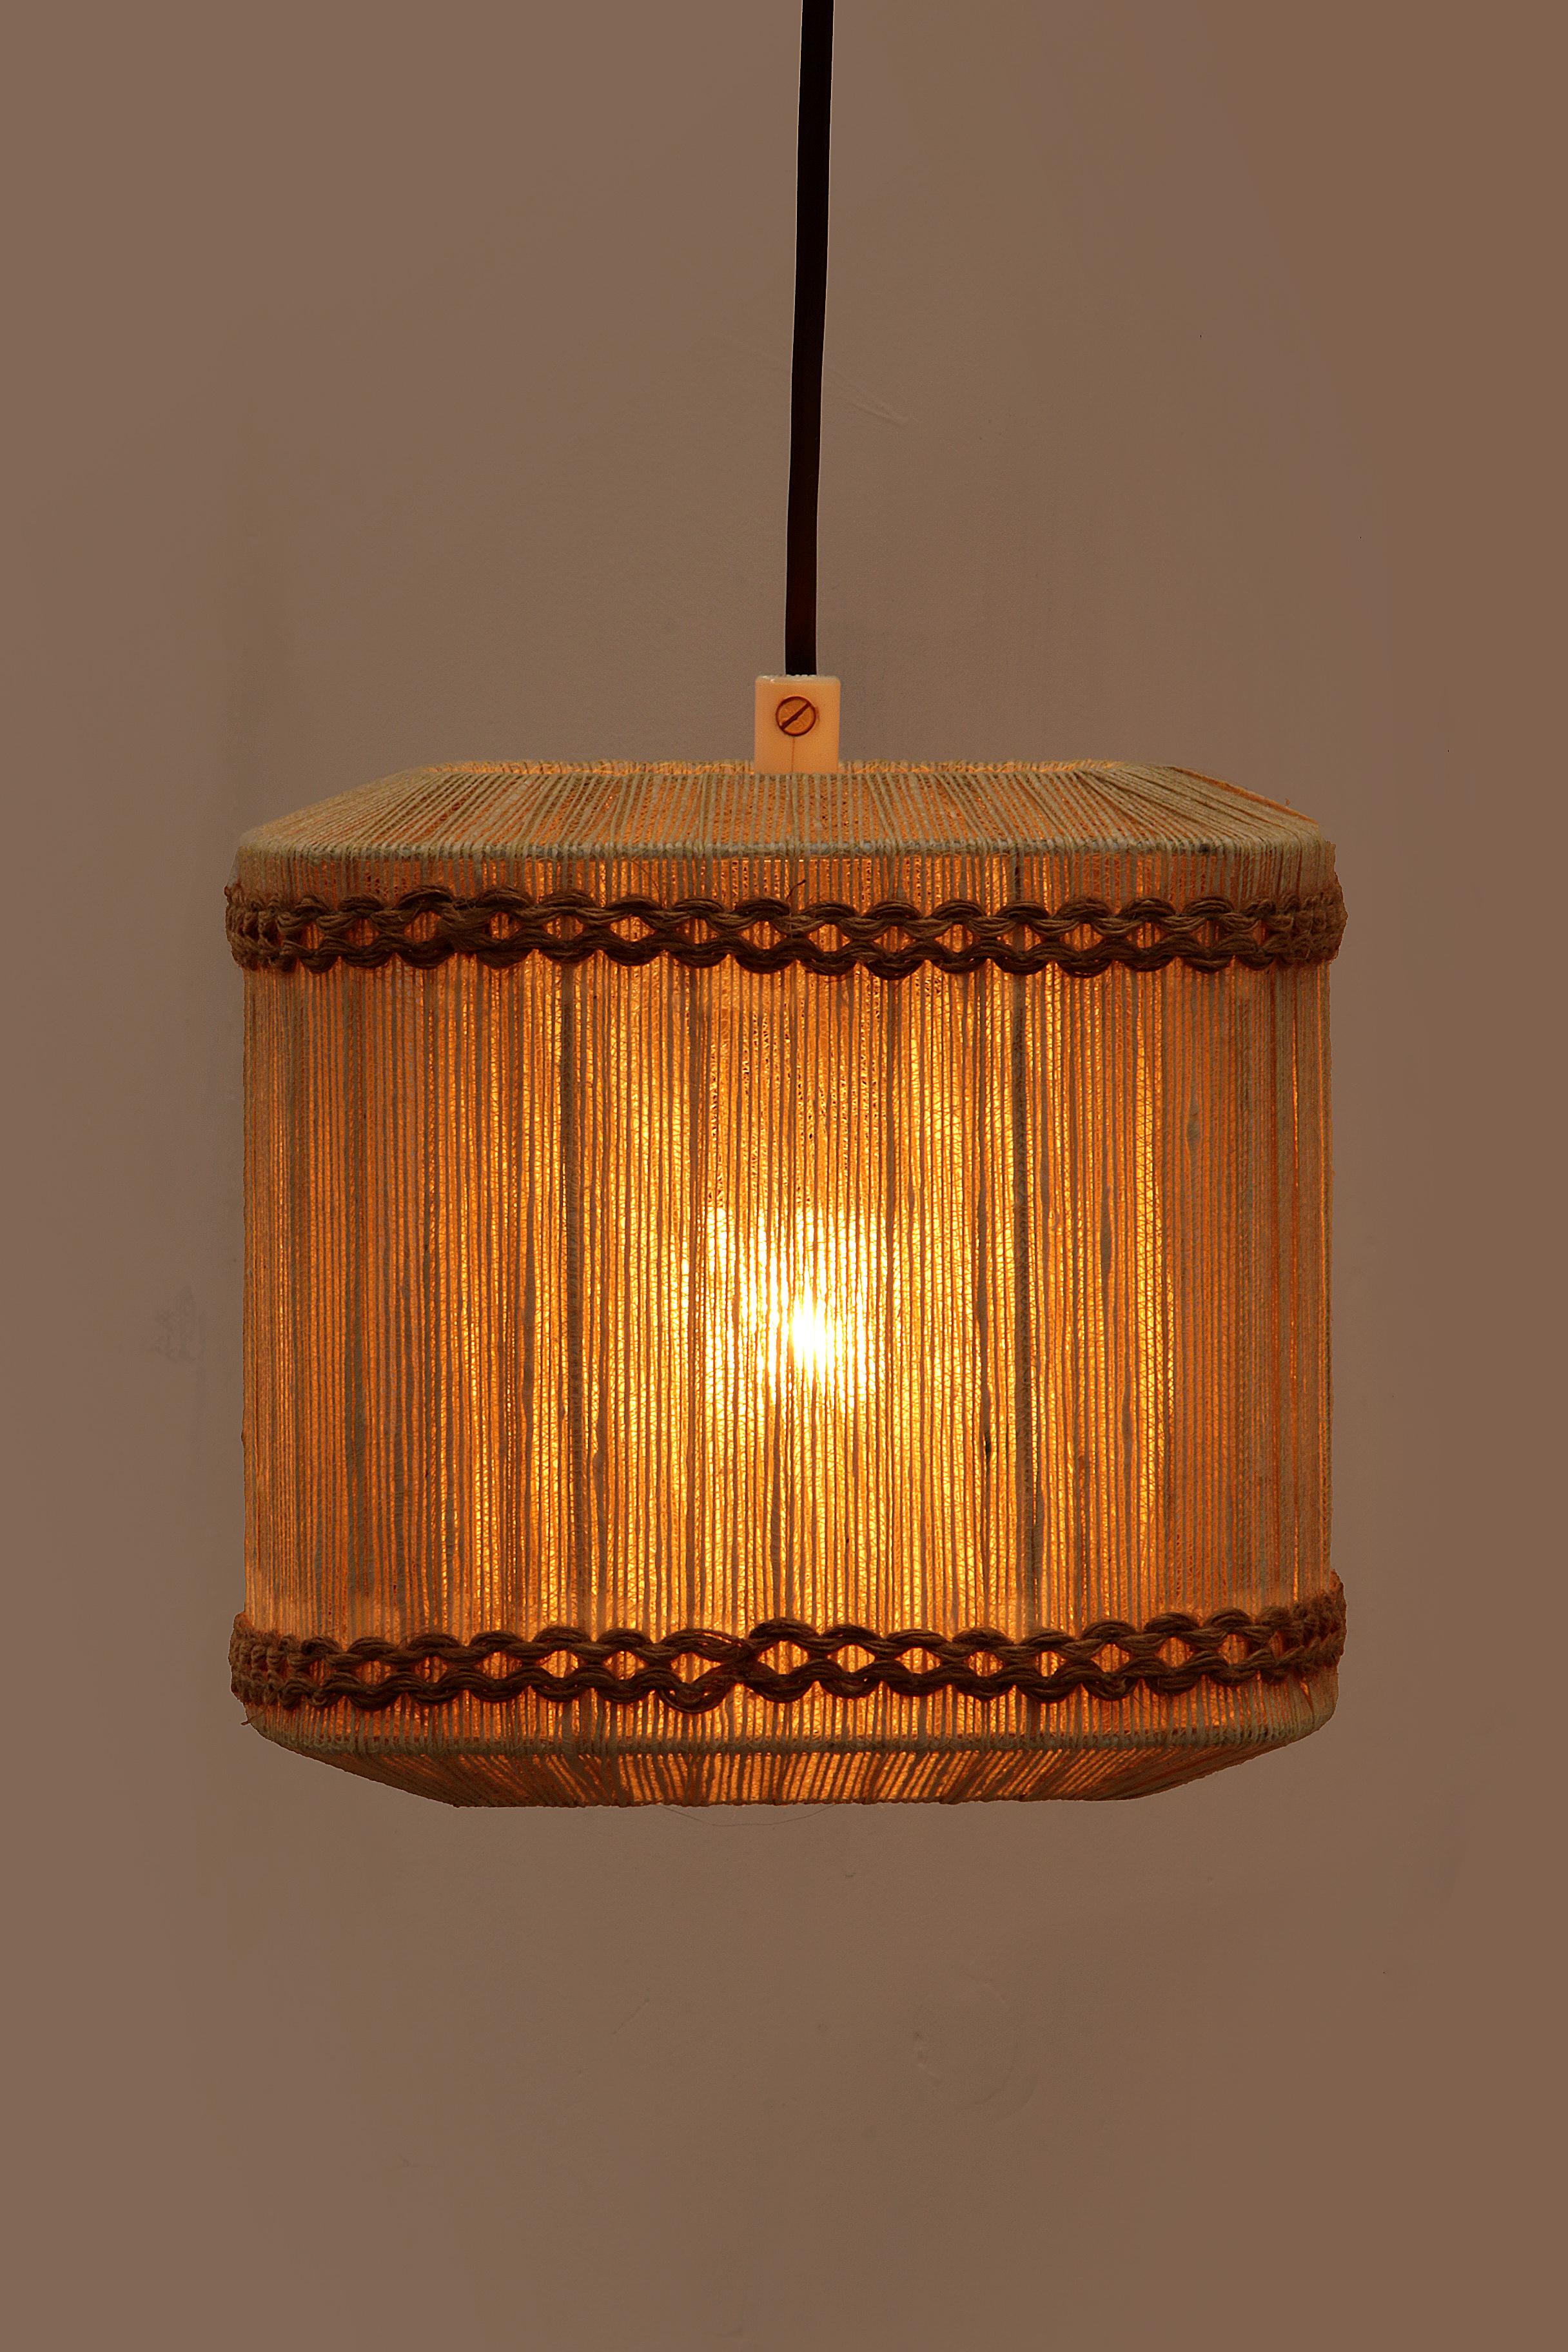 Swedish Vintage Wall hanging lamp made of rope and teak, 1960s Sweden.